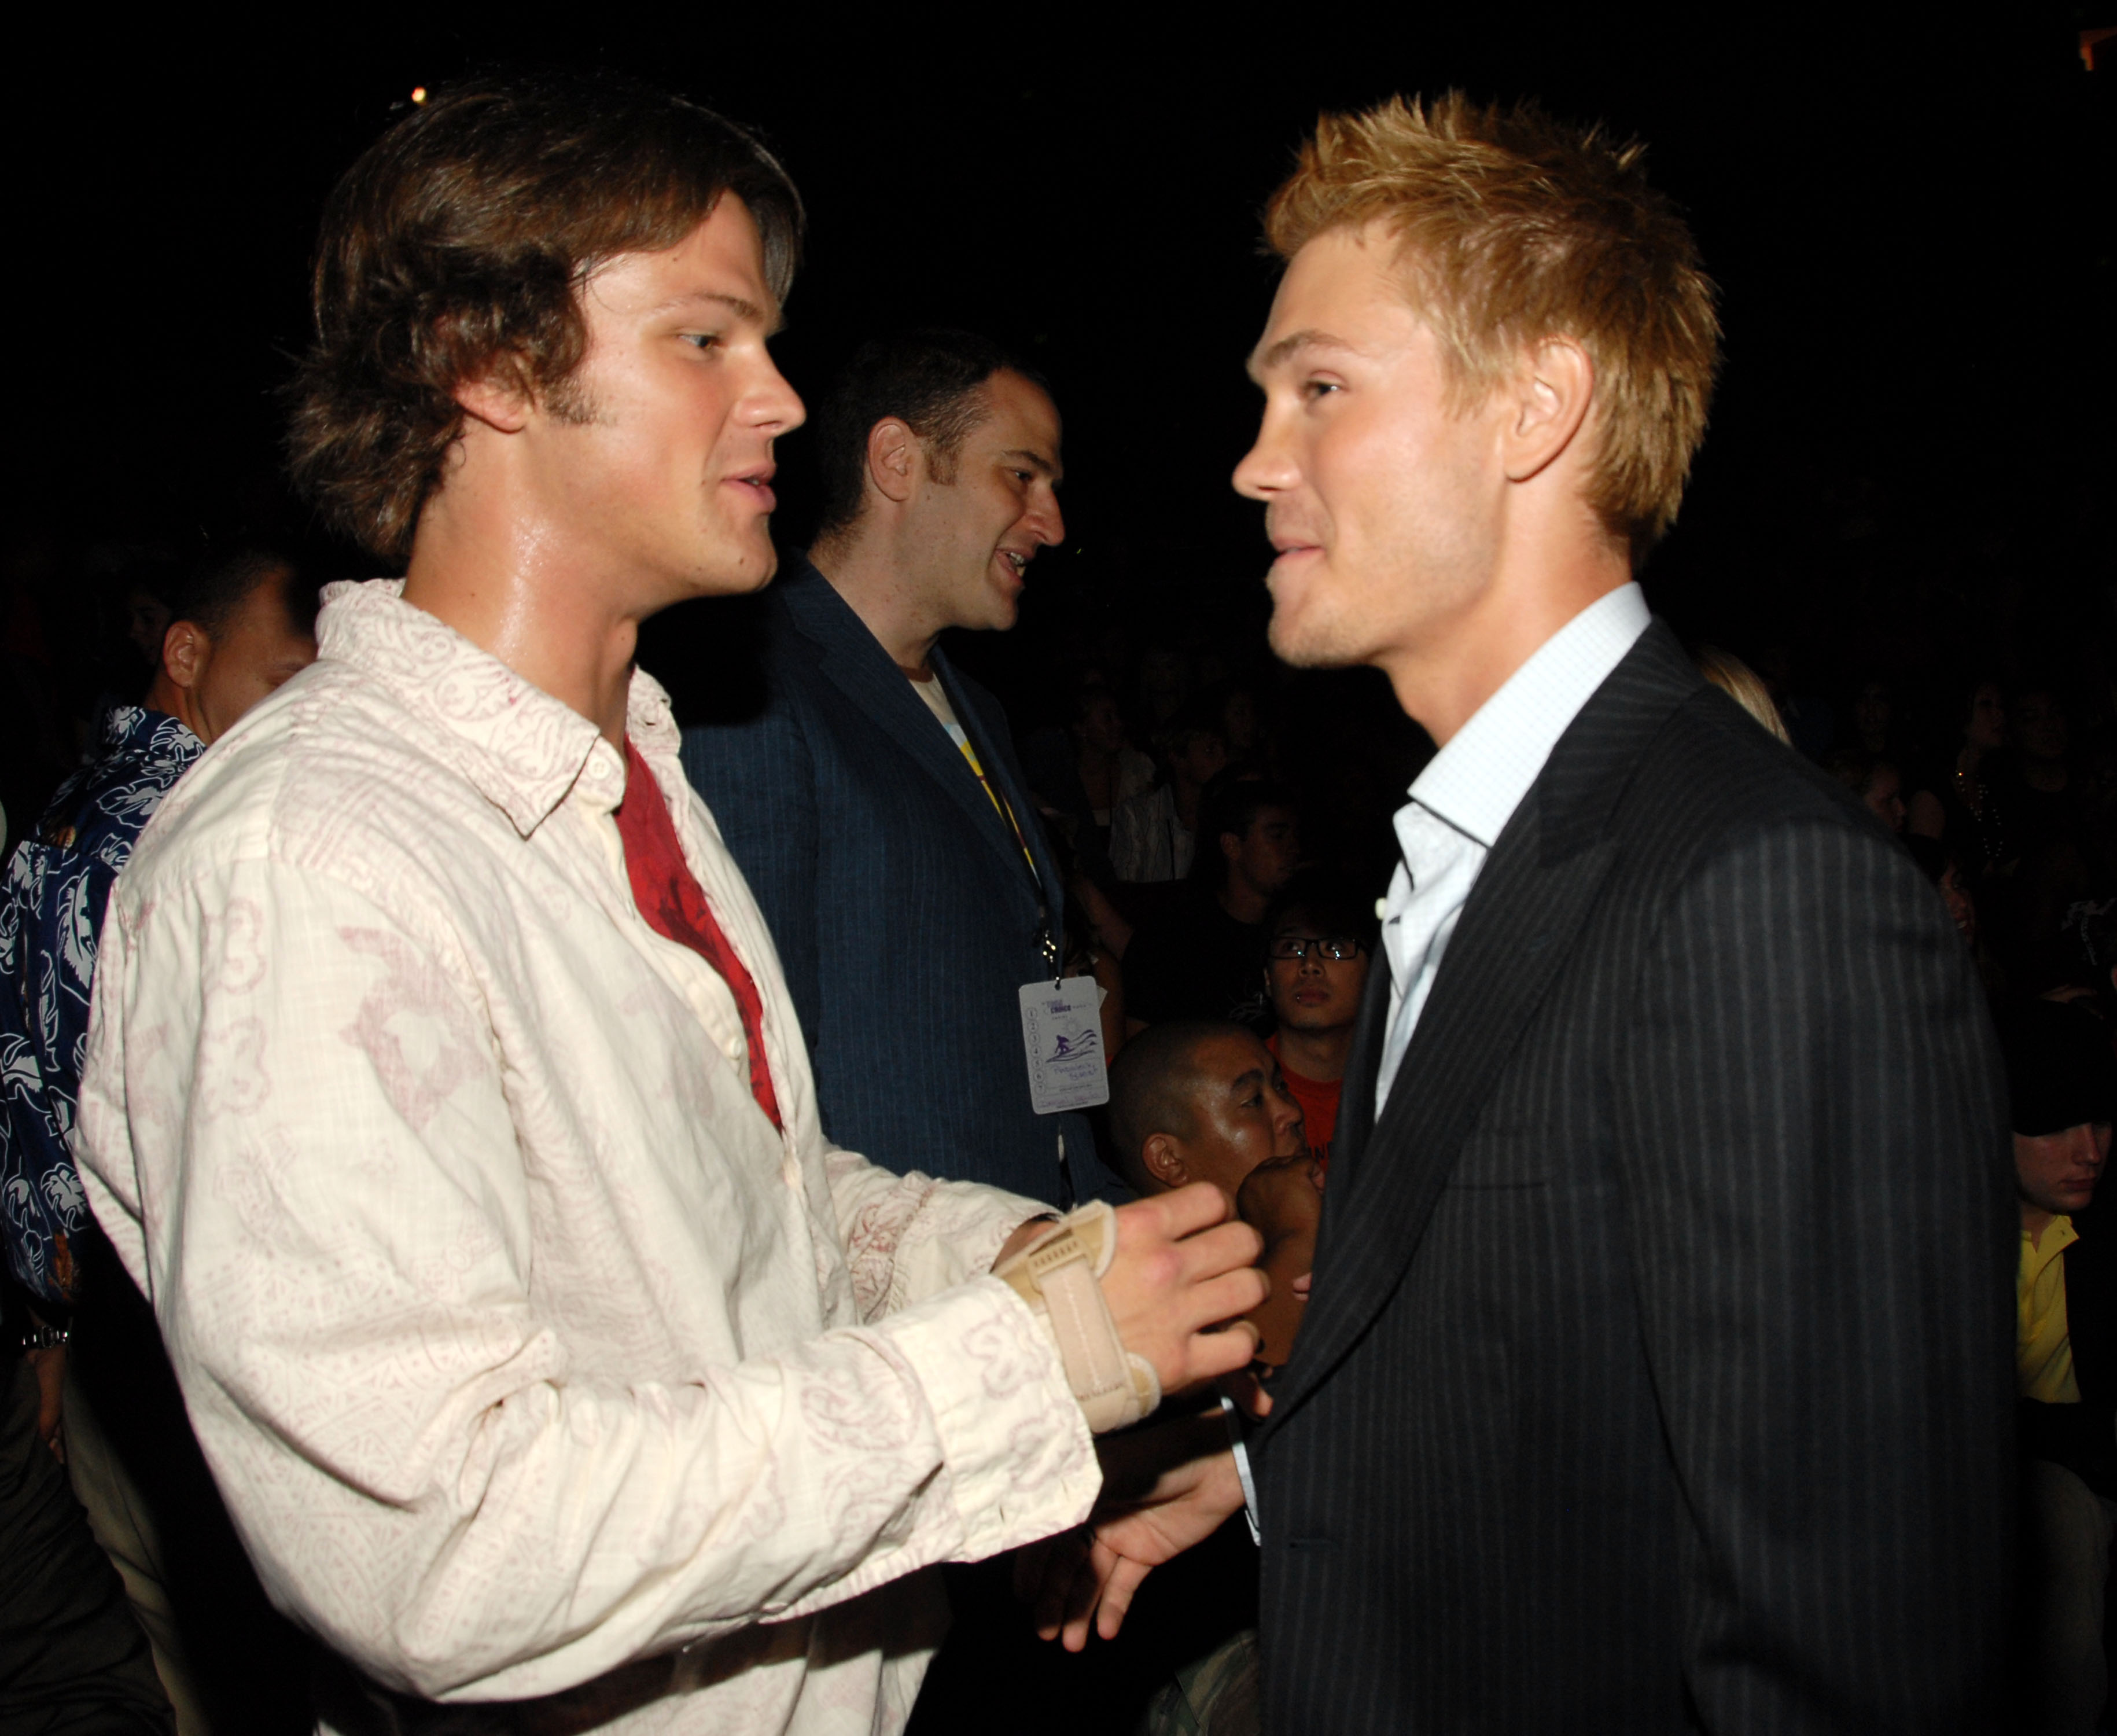 Jared Padalecki and Chad Michael Murray chat at the 2006 Teen Choice Awards. Padelecki and Murray both appeared in 'Gilmore Girls'. Padalecki played Dean Forrester. Murray took on the role of Tristan Dugray